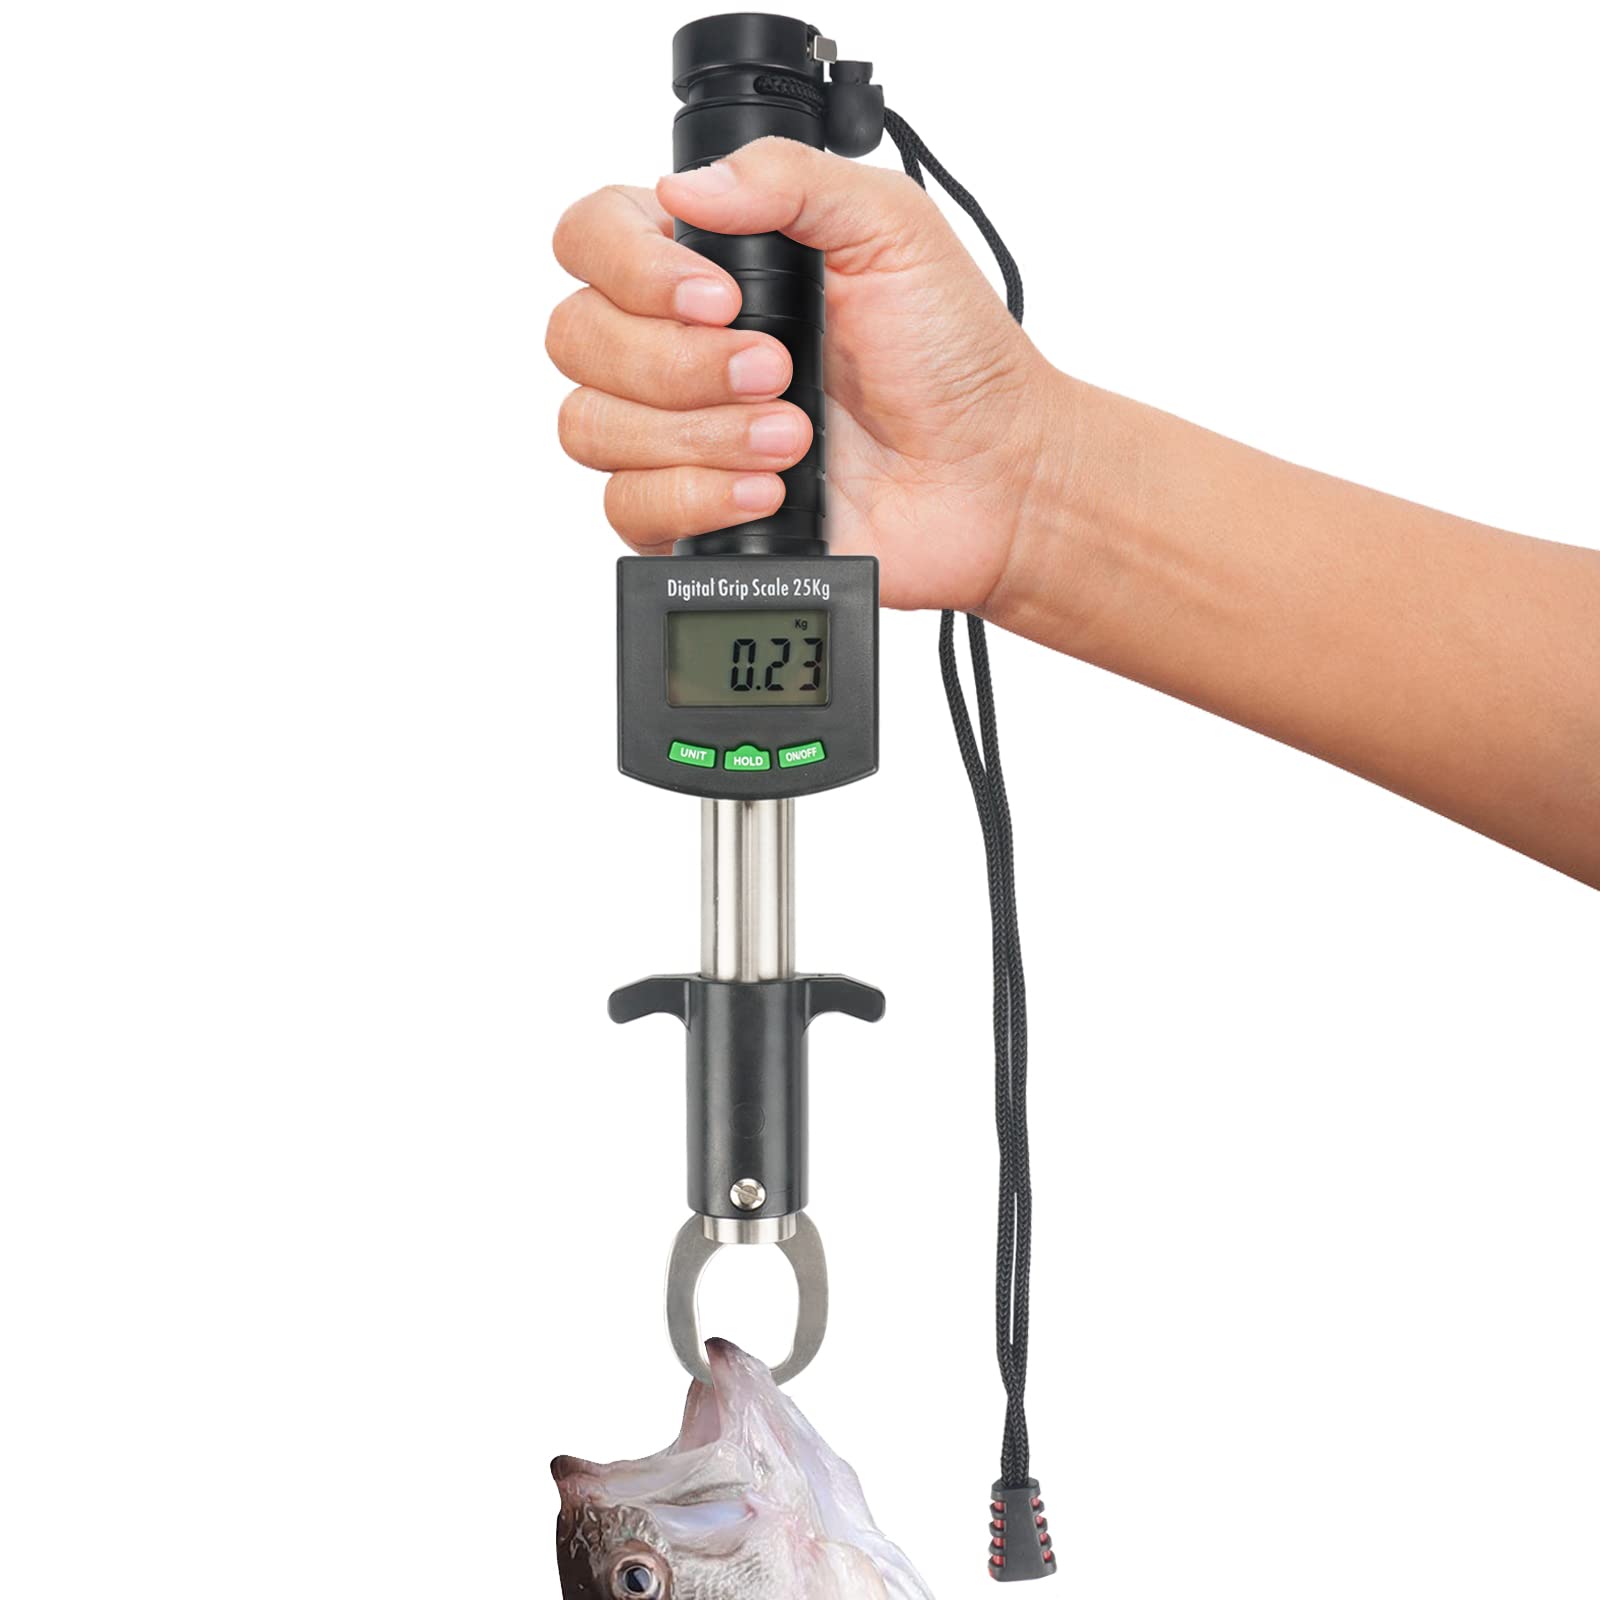 Fish Lip Gripper Fish Digital Scale Fish Holder with Electronic Weight Scale